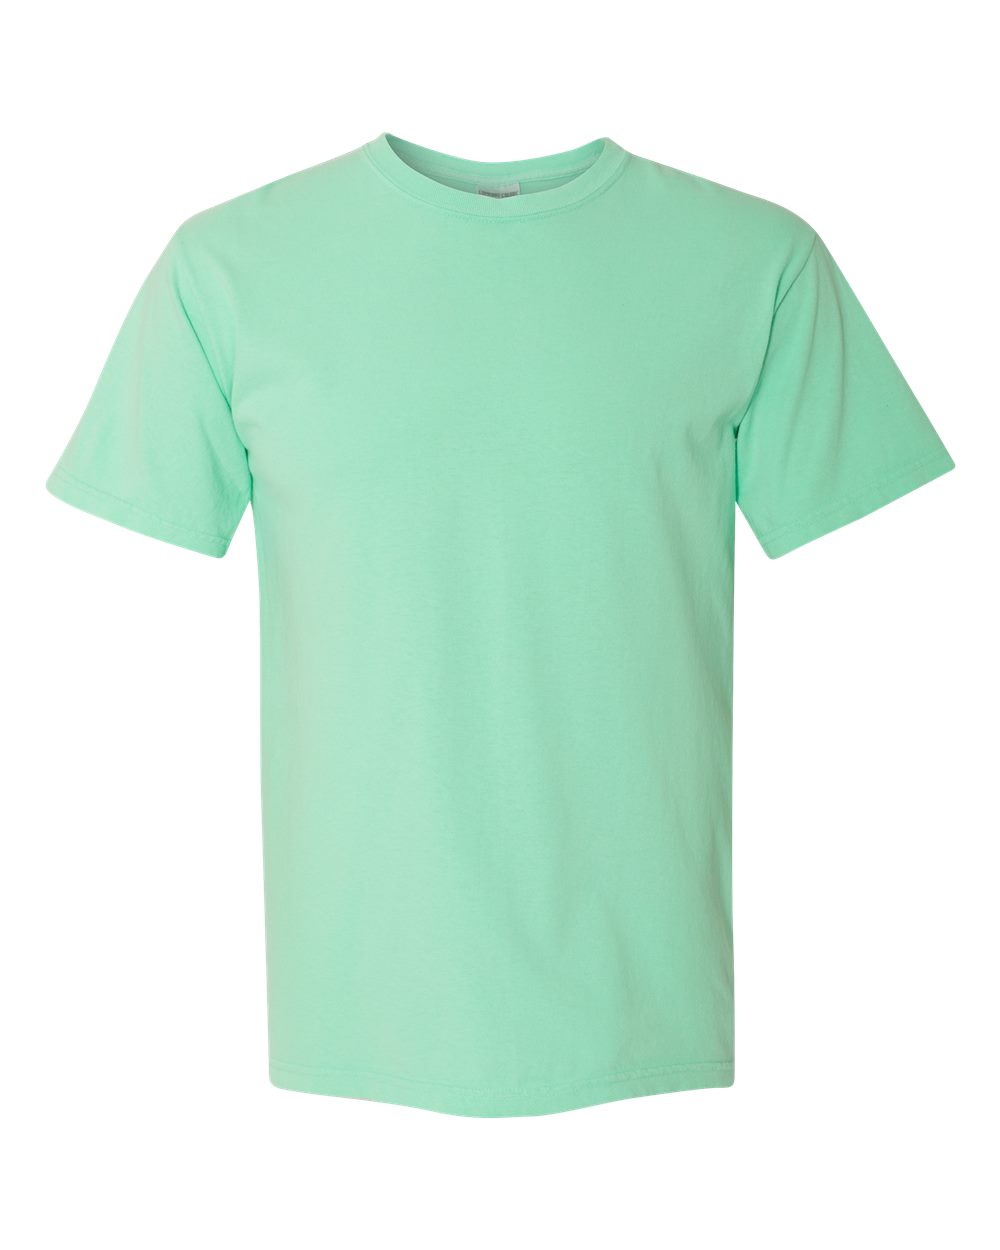 Comfort Colors Garment-Dyed Tee (1717) in Island Reef